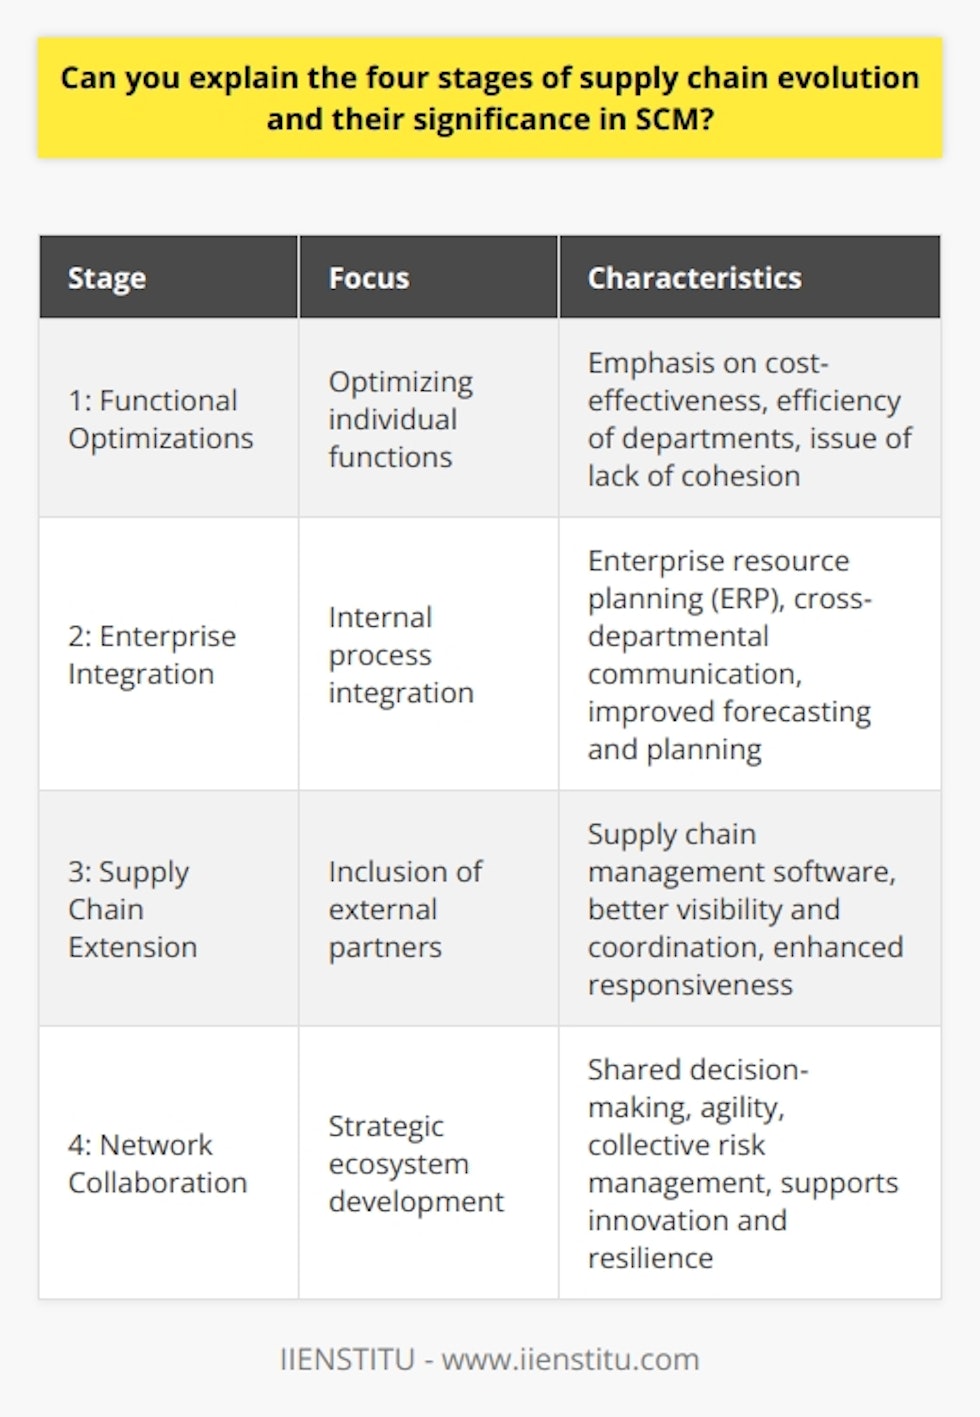 Supply chain management (SCM) is a dynamic field that has undergone significant transformation as businesses strive to improve operational efficiency and customer satisfaction. The evolution of SCM can be divided into four distinct stages, each bringing about new strategies and advancements in how companies manage their supply chains.**Stage 1: Functional Optimizations**In the initial phase of supply chain evolution, the primary focus was on optimizing individual functions like procurement, production, warehousing, and distribution. Organizations were primarily task-oriented, aiming to enhance the efficiency and cost-effectiveness of each department. This approach often led to an emphasis on immediate cost savings and local optimizations. However, it was limited by a lack of cohesion and alignment, which sometimes resulted in suboptimal performance for the overall supply chain.**Stage 2: Enterprise Integration**Moving beyond isolated functional optimization, the second stage involved integrating internal processes to facilitate a more cohesive approach to managing the supply chain. Here, the importance of cross-departmental communication and harmony became more pronounced. Approaches such as enterprise resource planning (ERP) systems emerged, allowing information to flow freely and enabling better forecasting, planning, and comprehensive management across the organization's internal supply chain.**Stage 3: Supply Chain Extension**The third stage expanded the horizon of supply chain management to include external partners, such as suppliers and customers. By embracing supply chain extension, businesses began to manage the flow of goods, information, and funds from the initial suppliers to the end customer as a single, continuous process. The advent of advanced information technology, such as internet-based communication and supply chain management software, facilitated greater visibility and coordination, leading to improvements in responsiveness, risk management, and customer satisfaction.**Stage 4: Network Collaboration**Currently, global supply chains have evolved into complex networks that require a high level of collaboration among all stakeholders—manufacturers, suppliers, transporters, distributors, and retailers. This fourth evolutionary stage emphasizes the creation of a strategic ecosystem whereby businesses jointly optimize the supply chain to derive mutual benefits. This network collaboration approach includes shared decision-making, agility in responding to market demands, and collective risk management. This comprehensive integration supports innovation and resilience, paving the way for sustainable competitive advantages in a constantly changing market landscape.Understanding and implementing strategies aligned with these four stages of supply chain evolution is critical for organizations aiming to enhance their SCM practices. As supply chains continue to evolve, factors such as globalization, technology advancements, sustainability, and consumer demands will further shape the future of SCM. Recognizing the significance of these stages helps businesses to anticipate and adapt to changes, remain competitive, and meet the dynamic needs of the market.